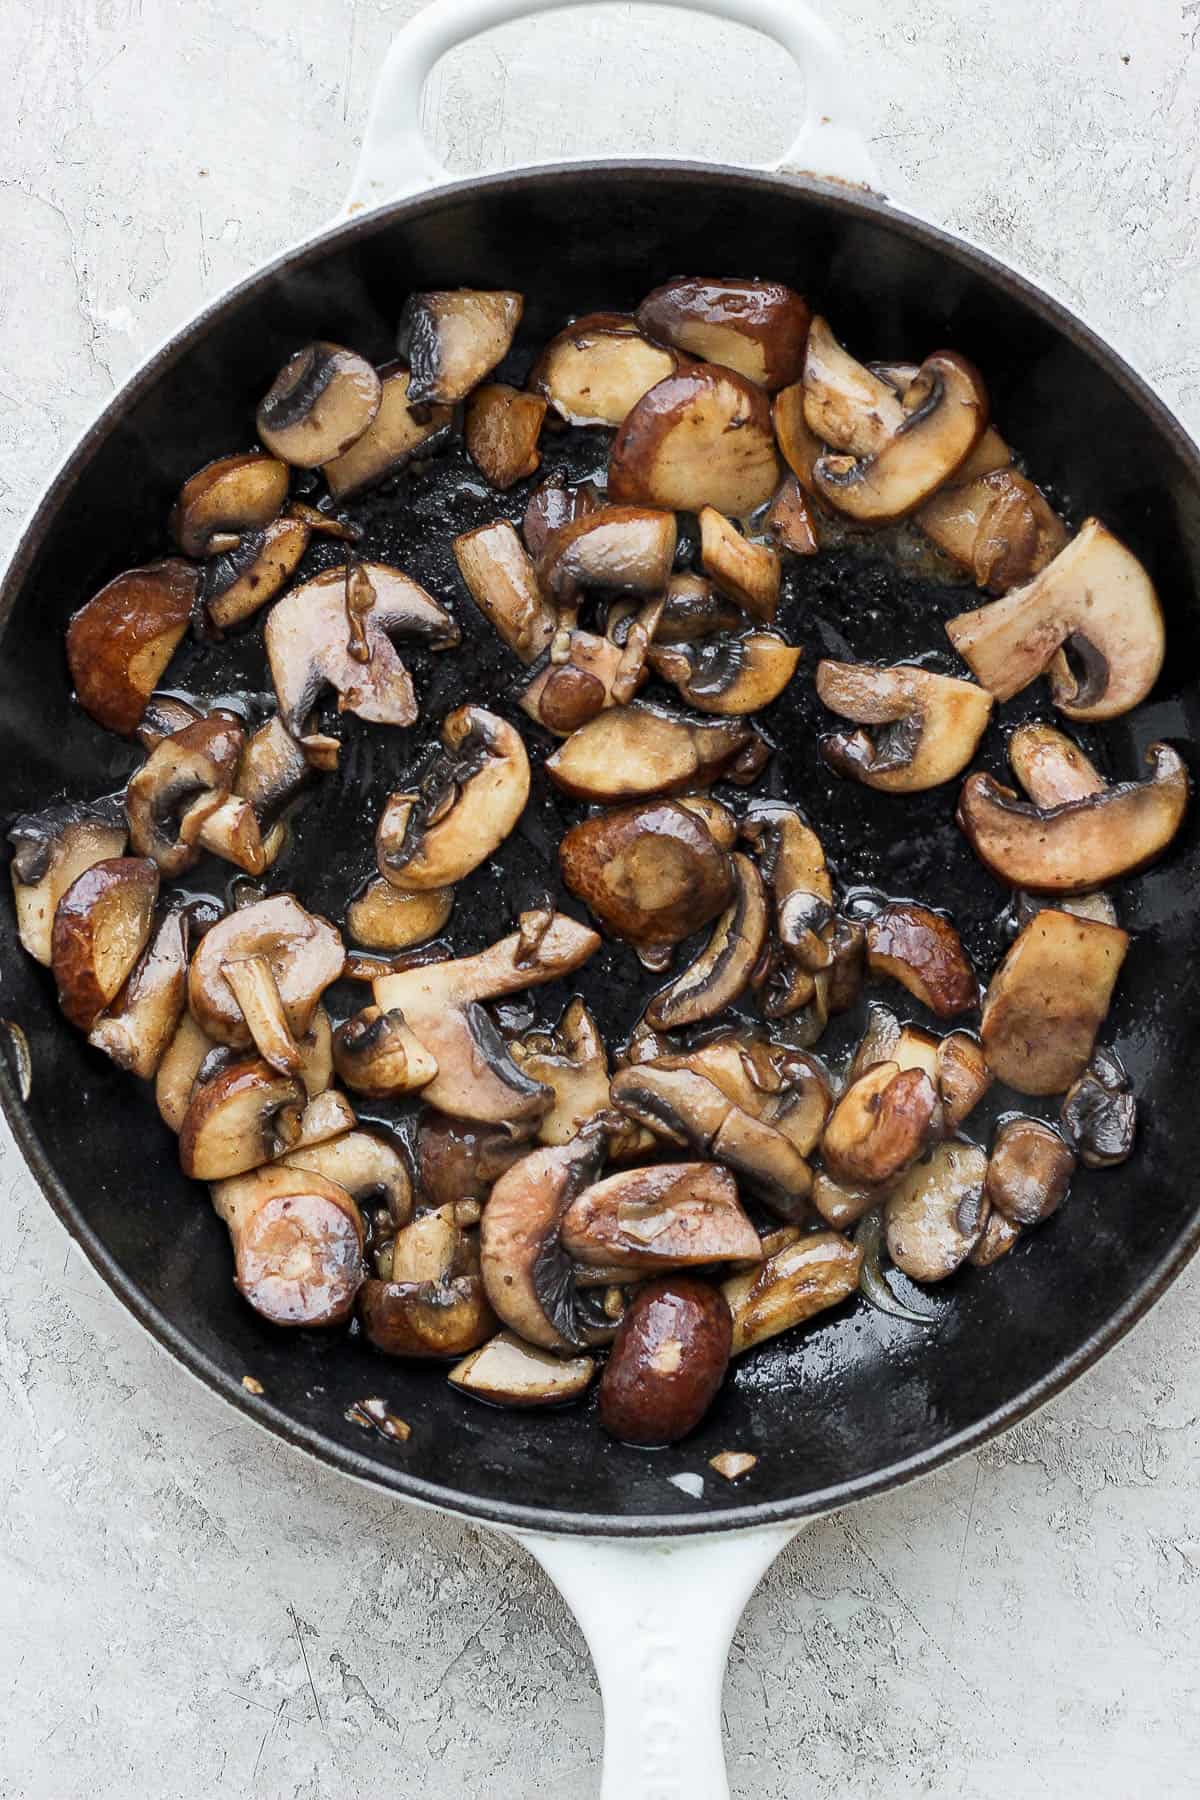 Baby bella mushrooms added to the skillet to soften.